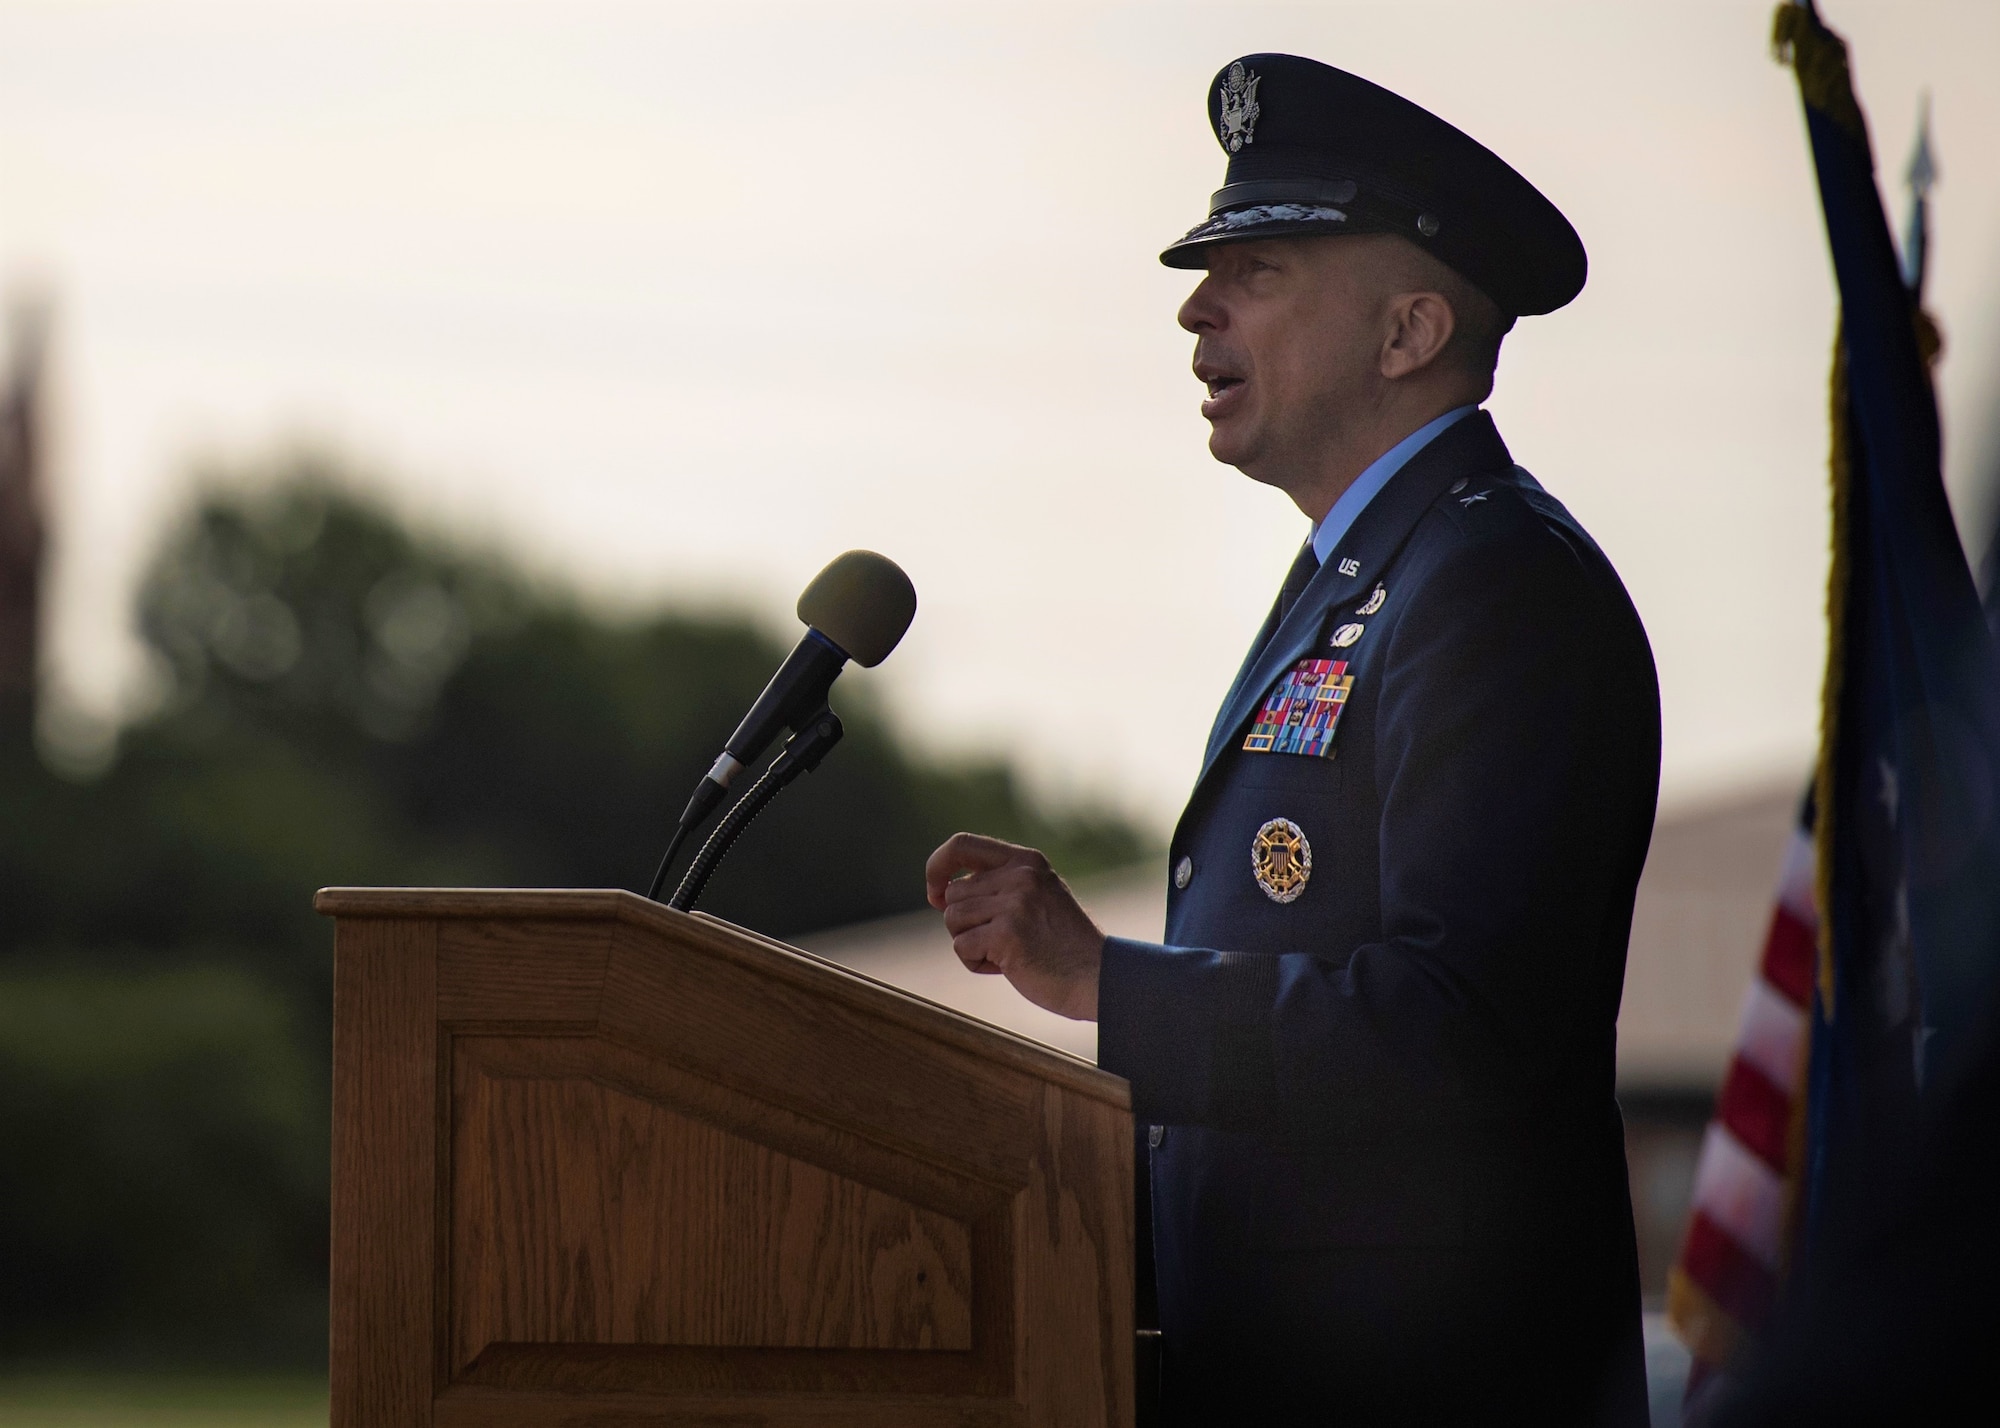 Brig. Gen. Lyle Drew, 82nd Training Wing incoming commander, gives a speech at the 82nd TRW Change of Command Ceremony at Sheppard Air Force Base, Texas, July 15, 2021. Drew's most recent accomplishments were, Maintenance Group Commander at Holloman AFB, New Mexico, 78th Air Wing Commander at Robins AFB, Georgia and Air Force Materiel Command Director of Staff at Wright-Patterson AFB, Ohio. Drew has many more accomplishments on his resume and he said that adding commander of the Air Force's largest training base is another great honor in his career. (U.S. Air Force photo by Staff Sgt. Pedro Tenorio)